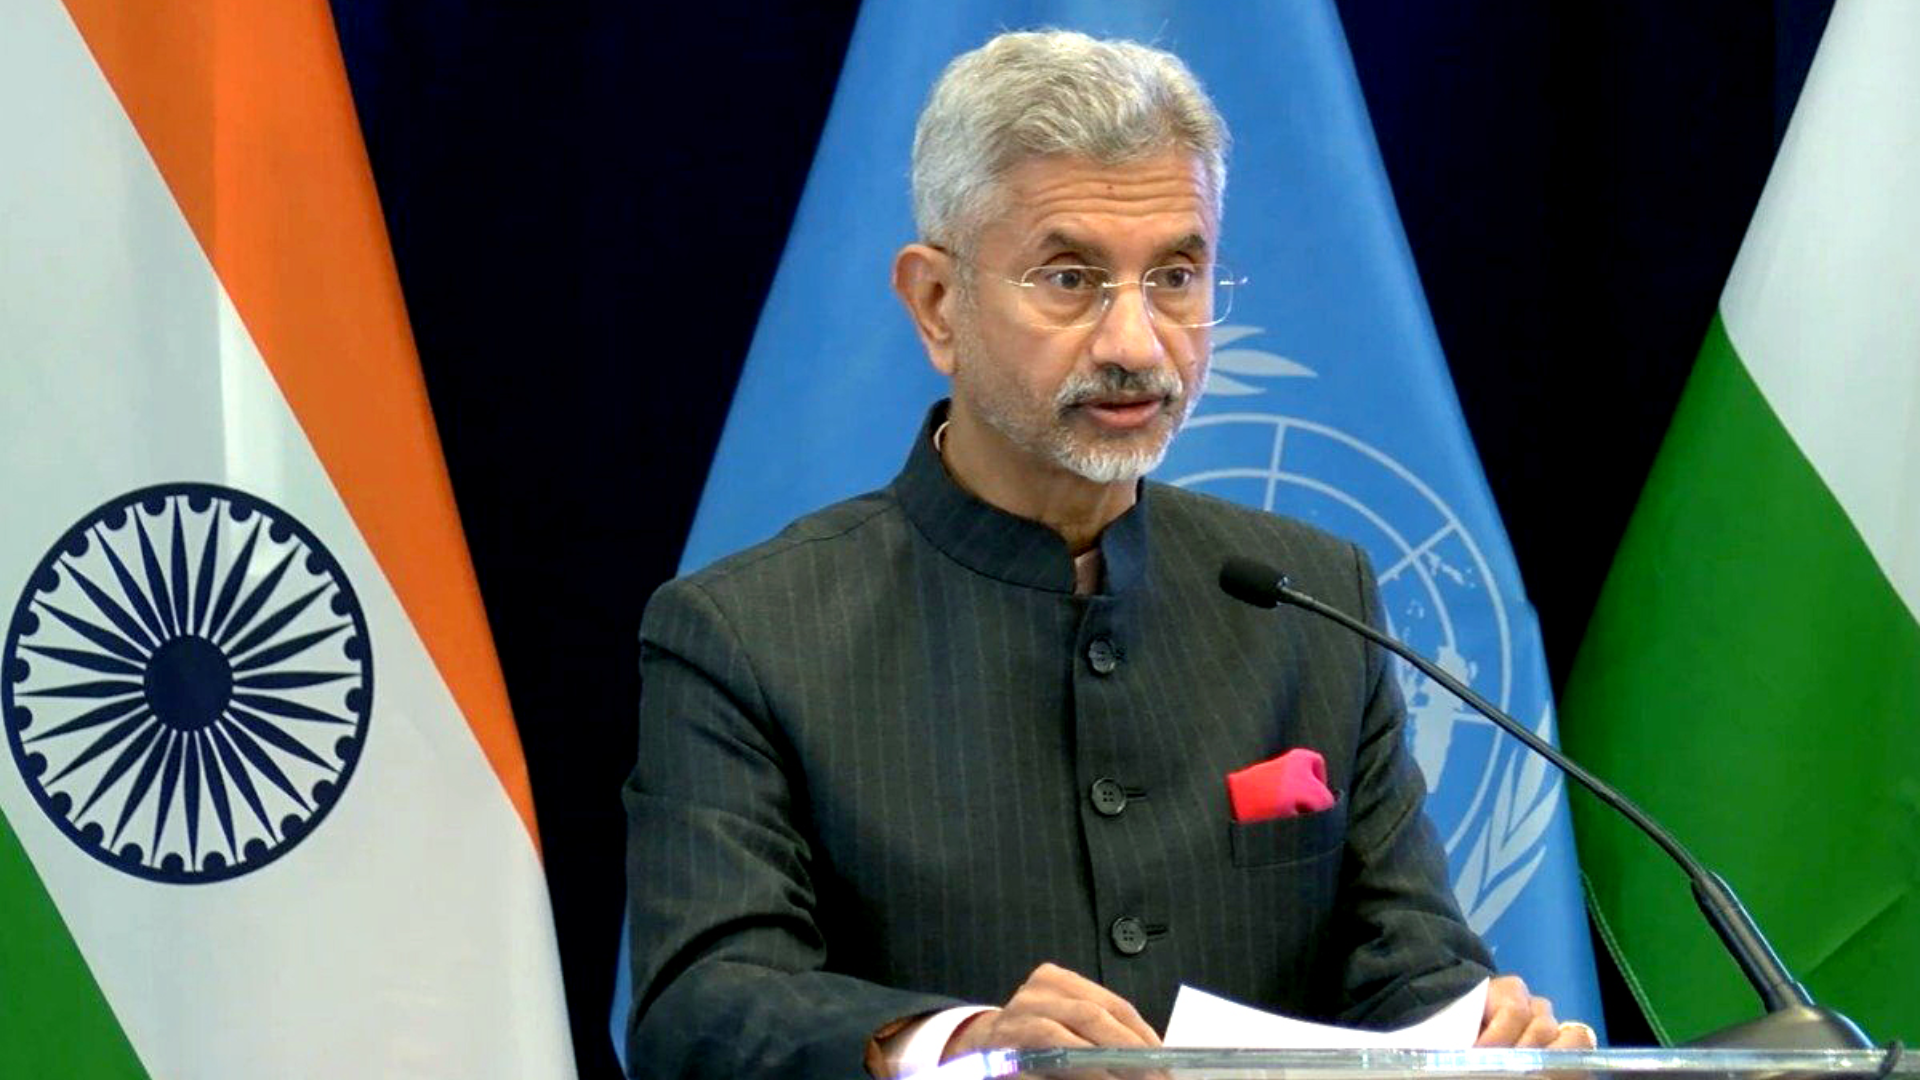 “Quad stands for our affirmative vision of a Free and Open Indo-Pacific,” EAM Jaishankar